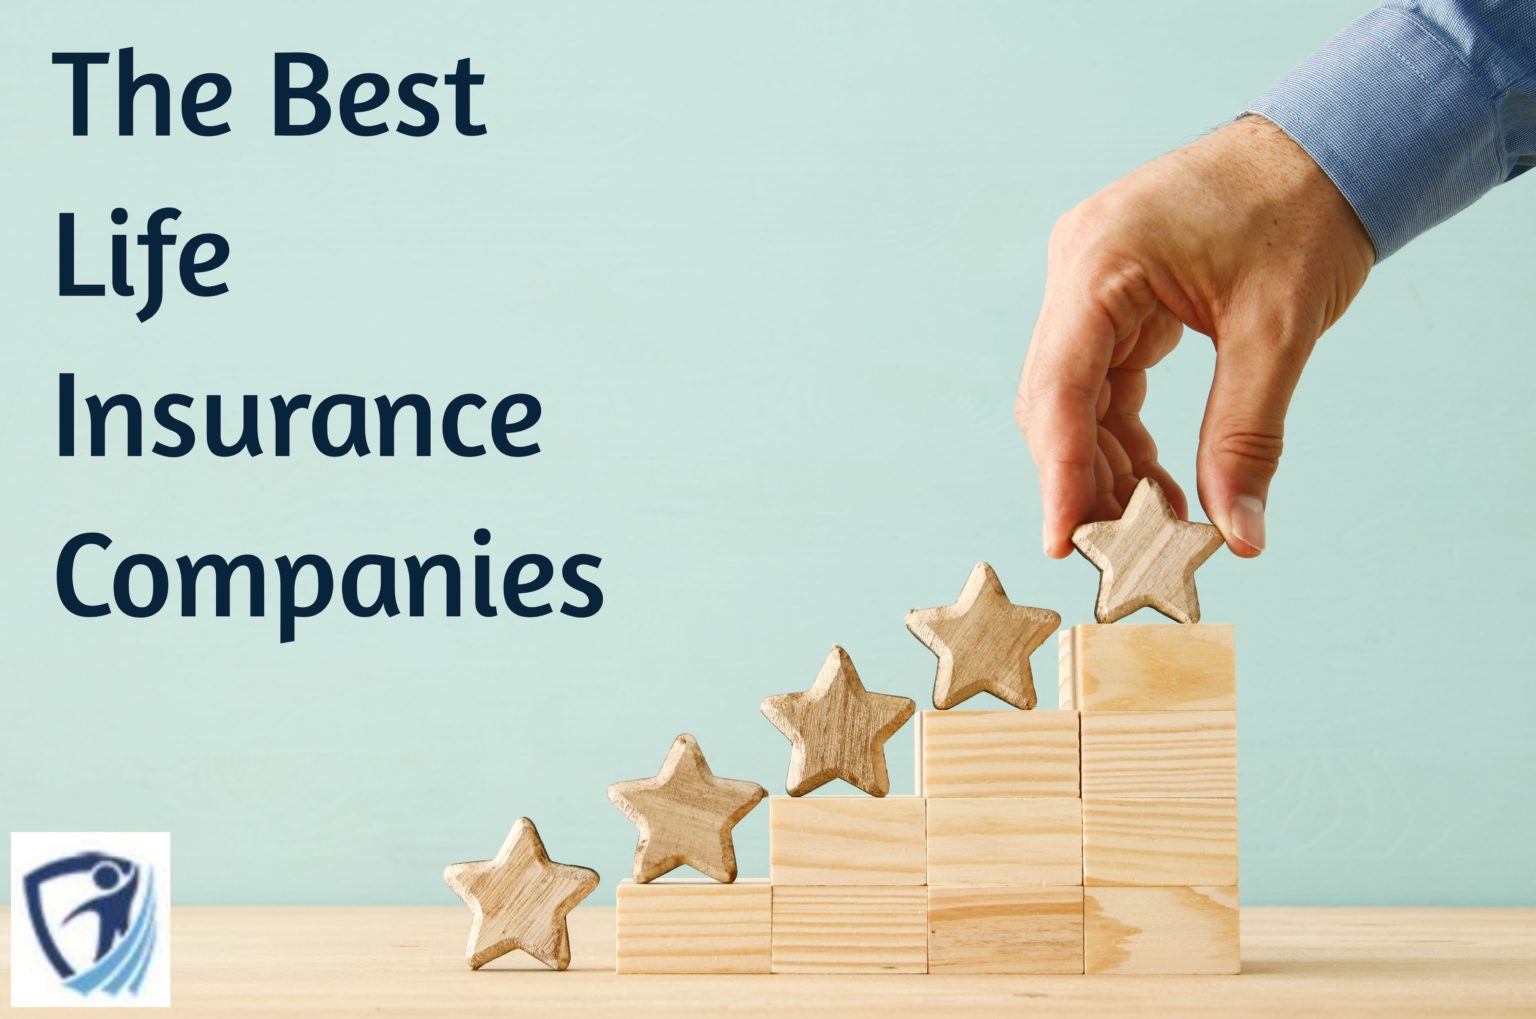 The Top 23 Best Life Insurance Companies in the U.S. [Term & Whole Life]